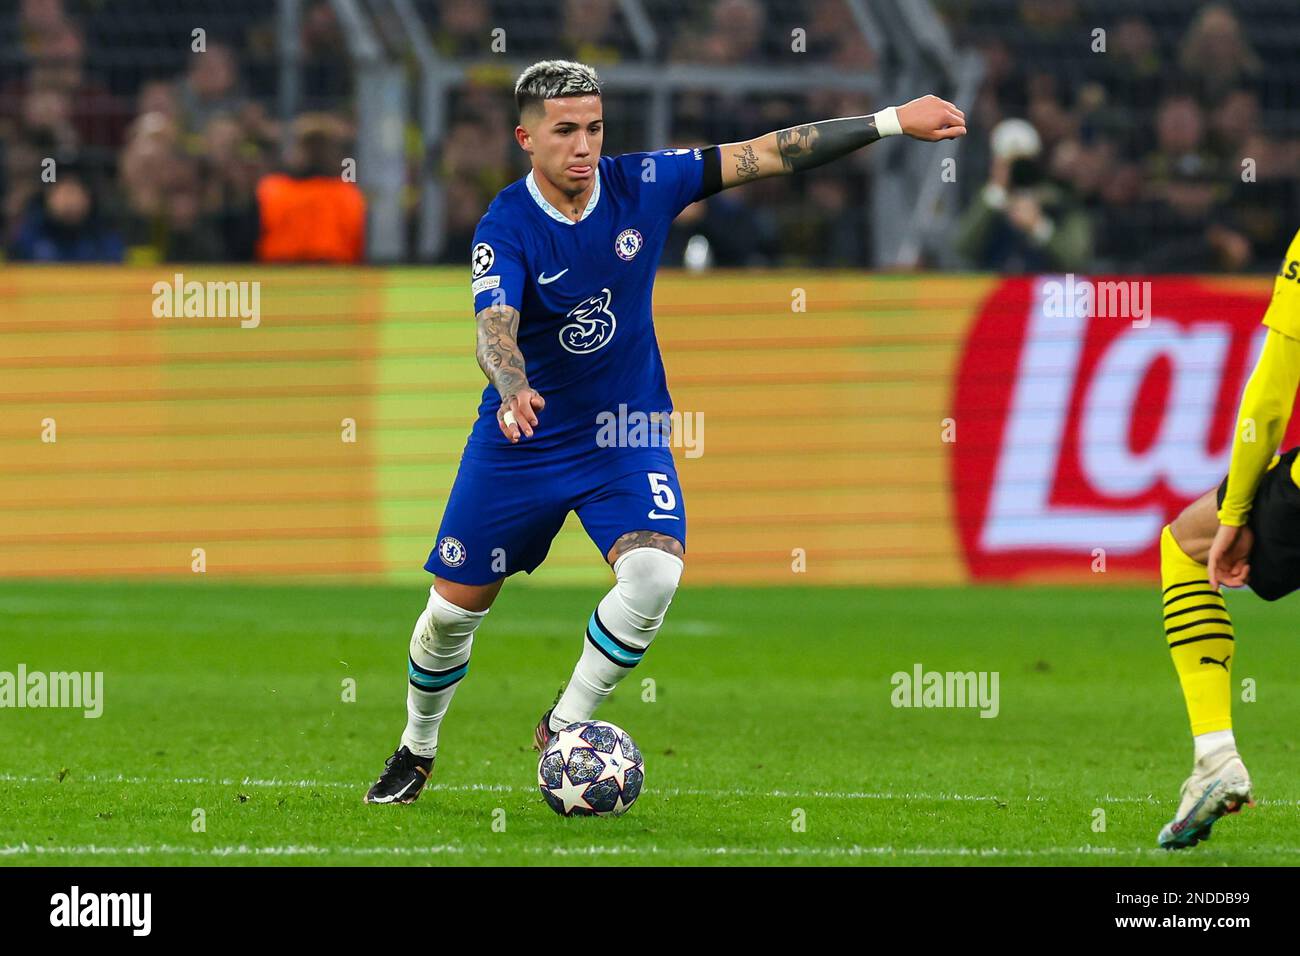 DORTMUND, GERMANY - FEBRUARY 15: Enzo Fernandez of Chelsea during the UEFA Champions Round of 16, 1st leg match between Borussia Dortmund and Chelsea at Signal Iduna Park on February 15, 2023 in Dortmund, Germany (Photo by Marcel ter Bals/Orange Pictures) Stock Photo